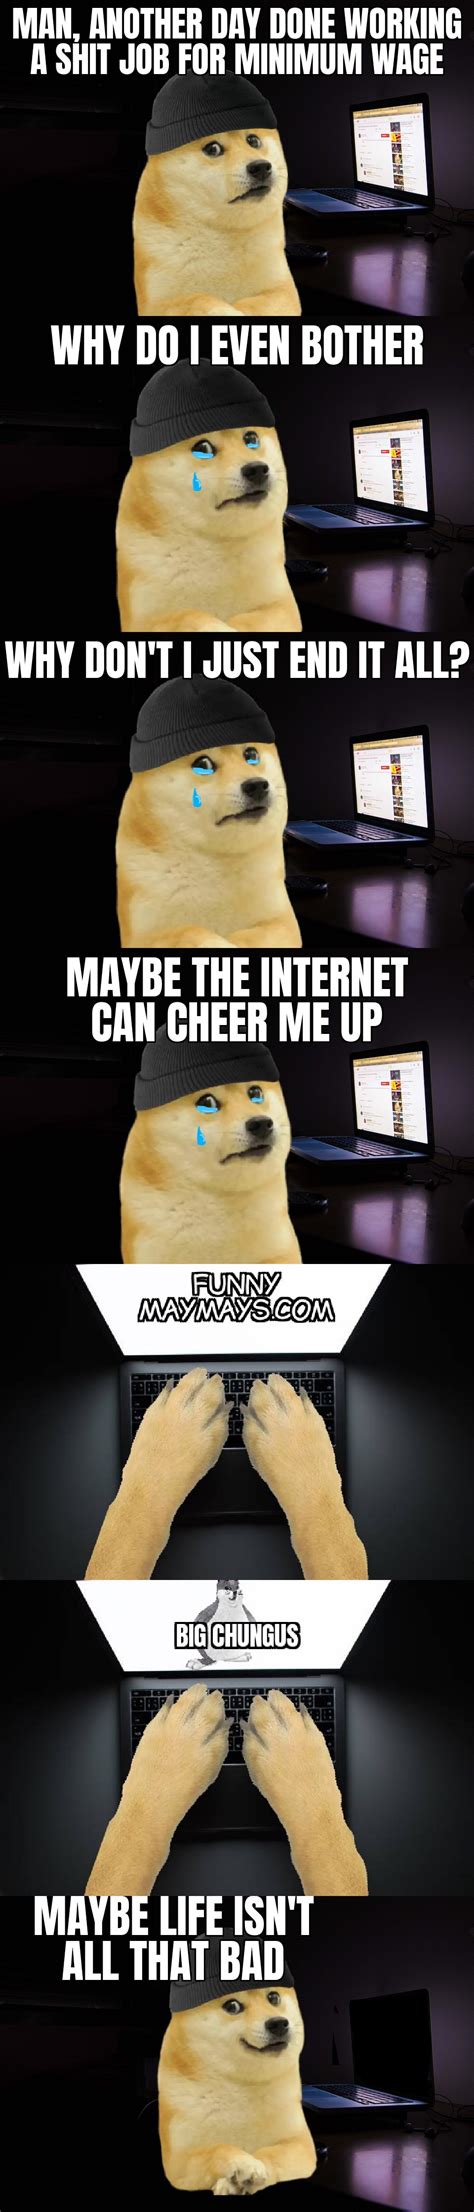 Big Chungus Is The Reason To Live Rdogelore Ironic Doge Memes